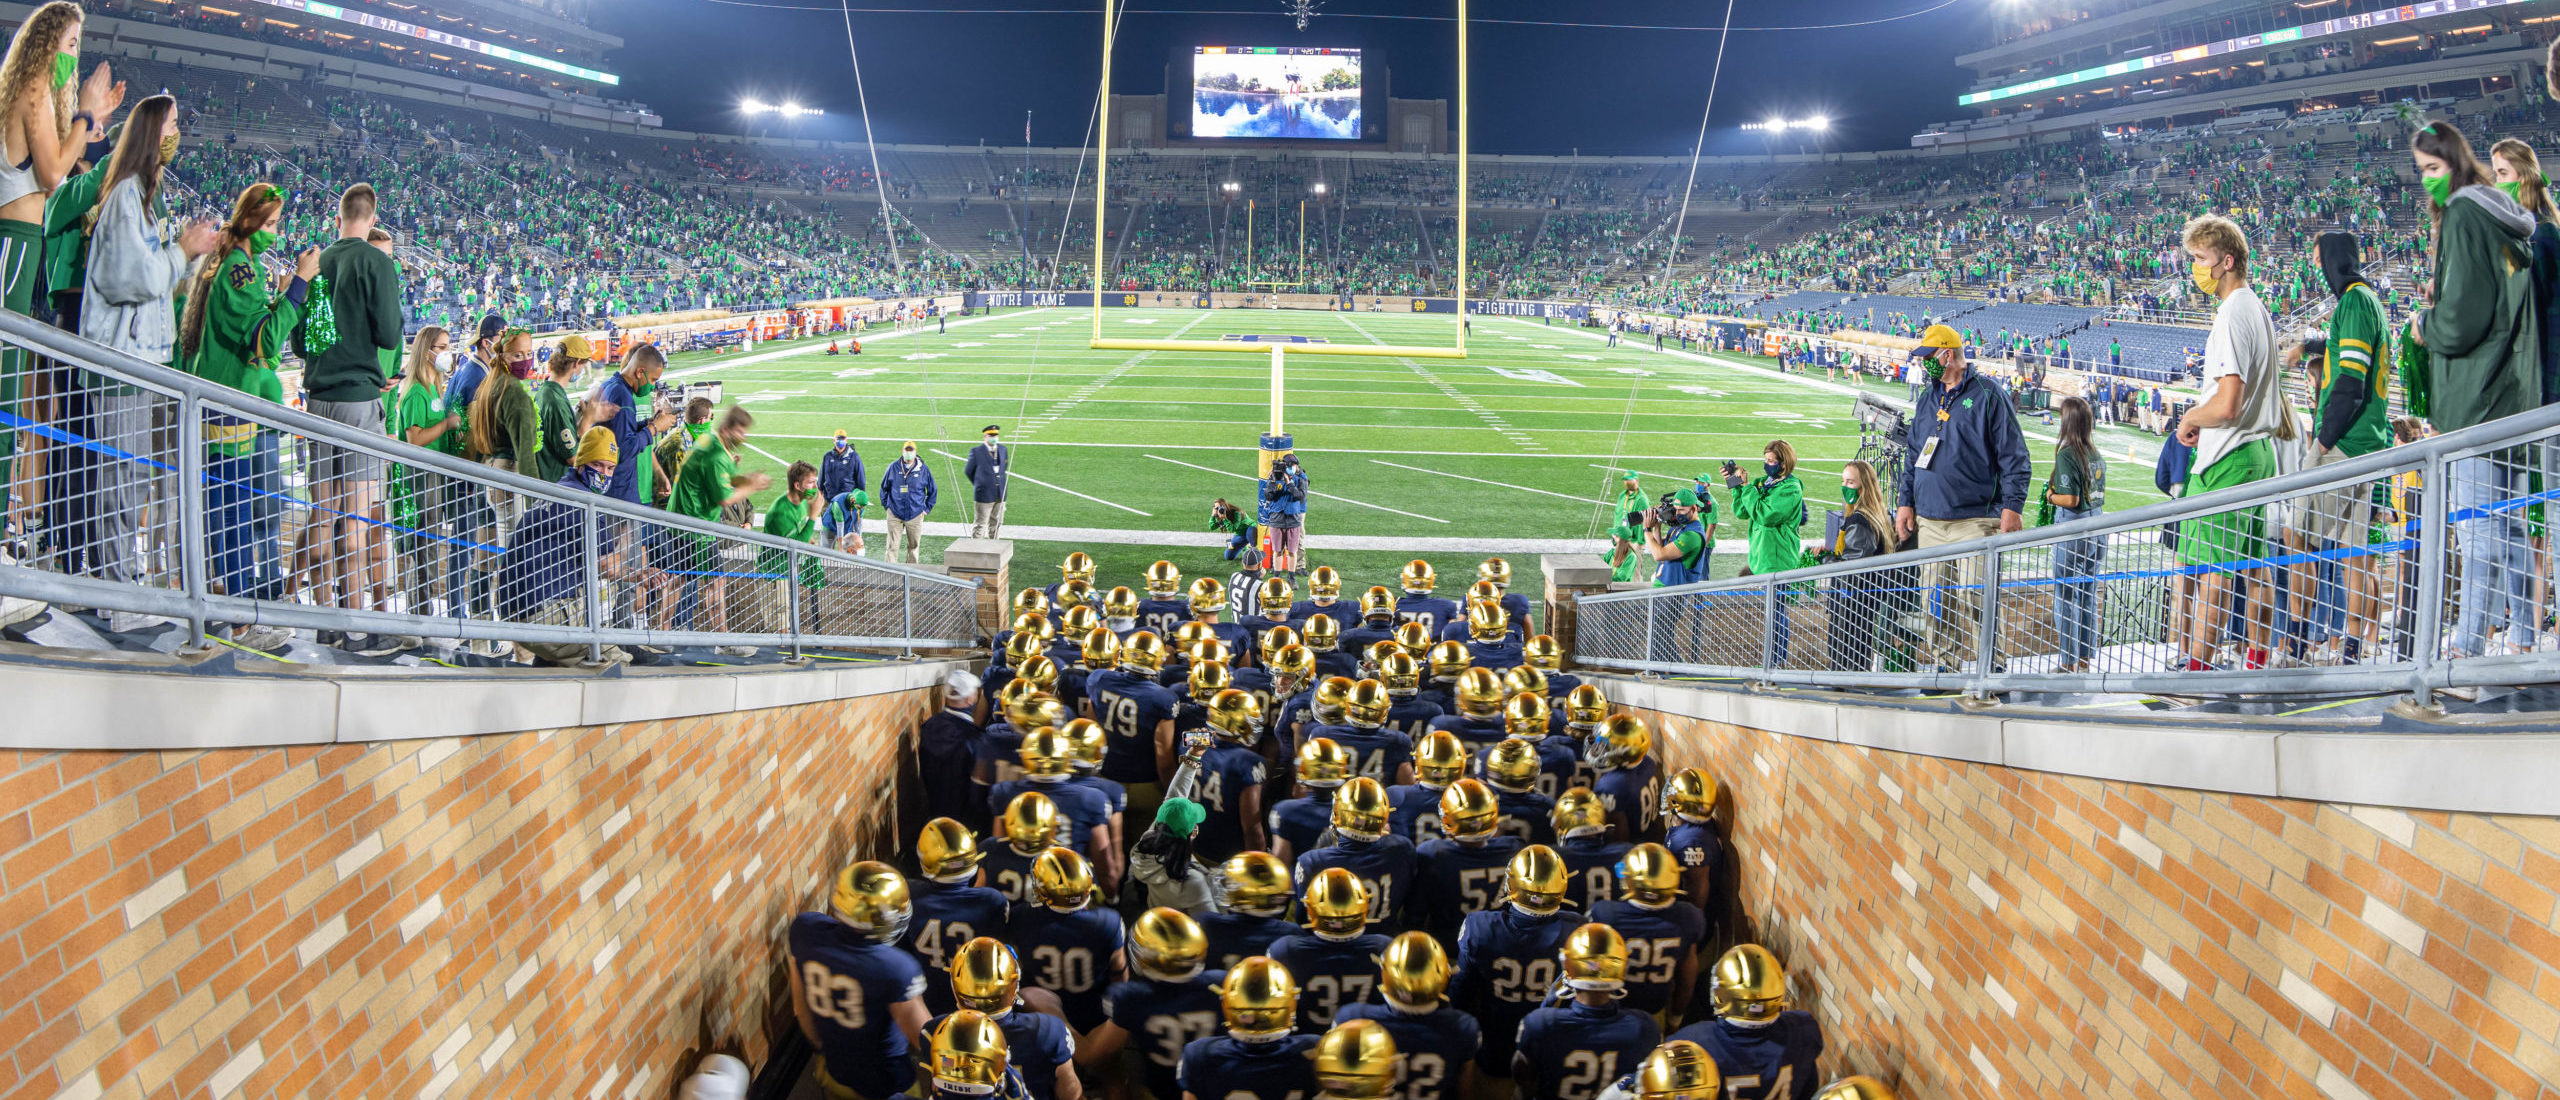 Notre Dame Requiring COVID-19 Tests After Students Storm Football Field